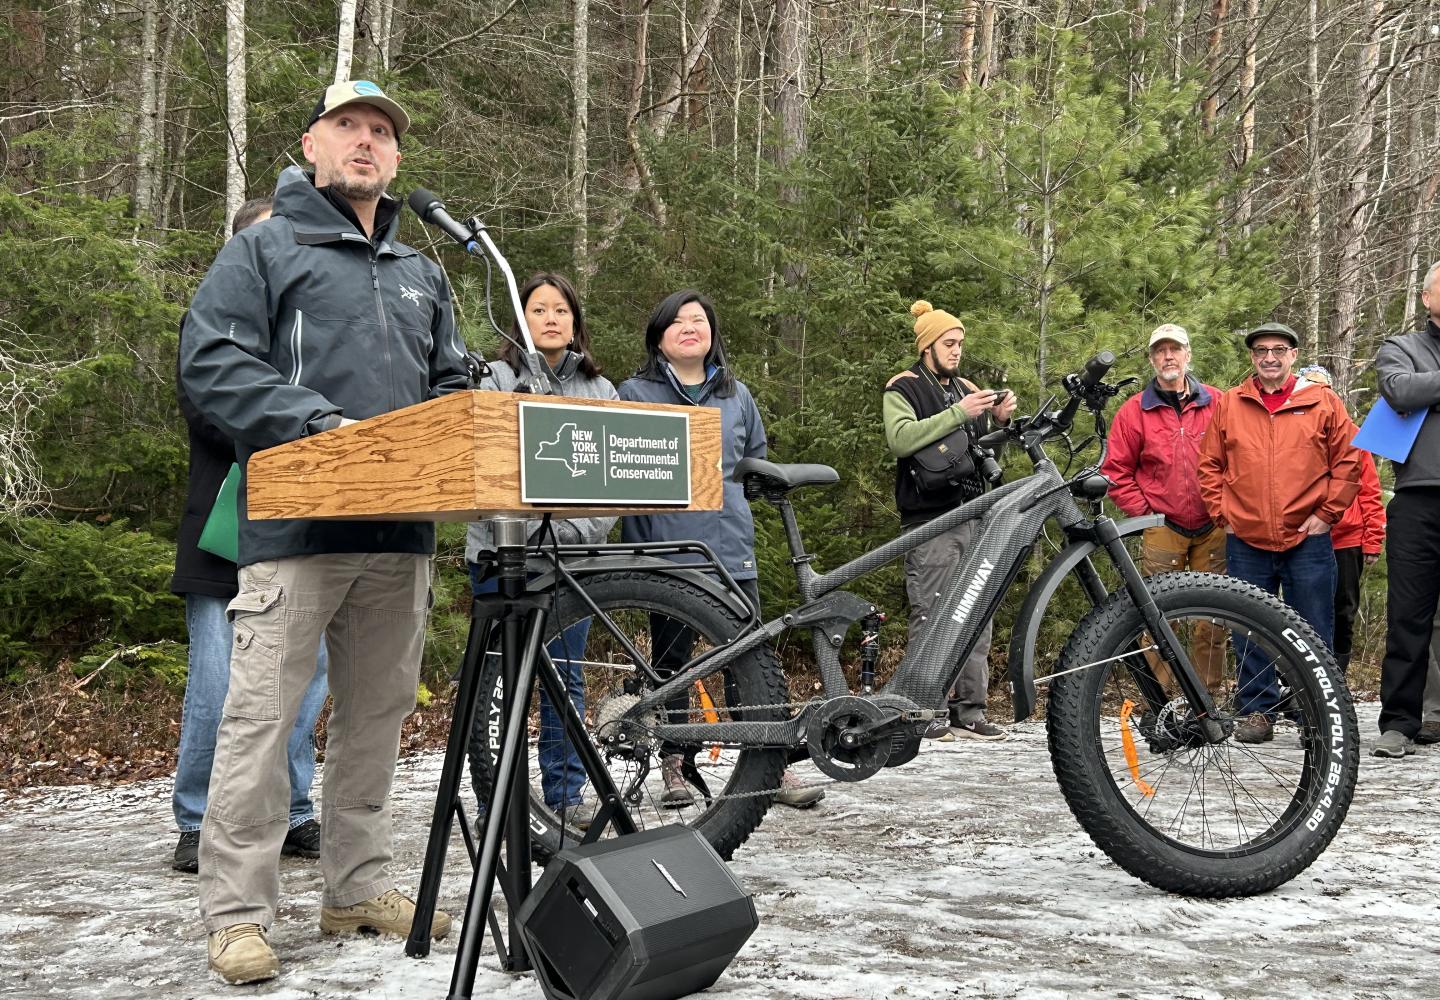 New York State Department of Environmental Conservation Commissioner Basil Seggos speaks at the ribbon cutting to officially open Phase 1 of the Adirondack Rail Trail.